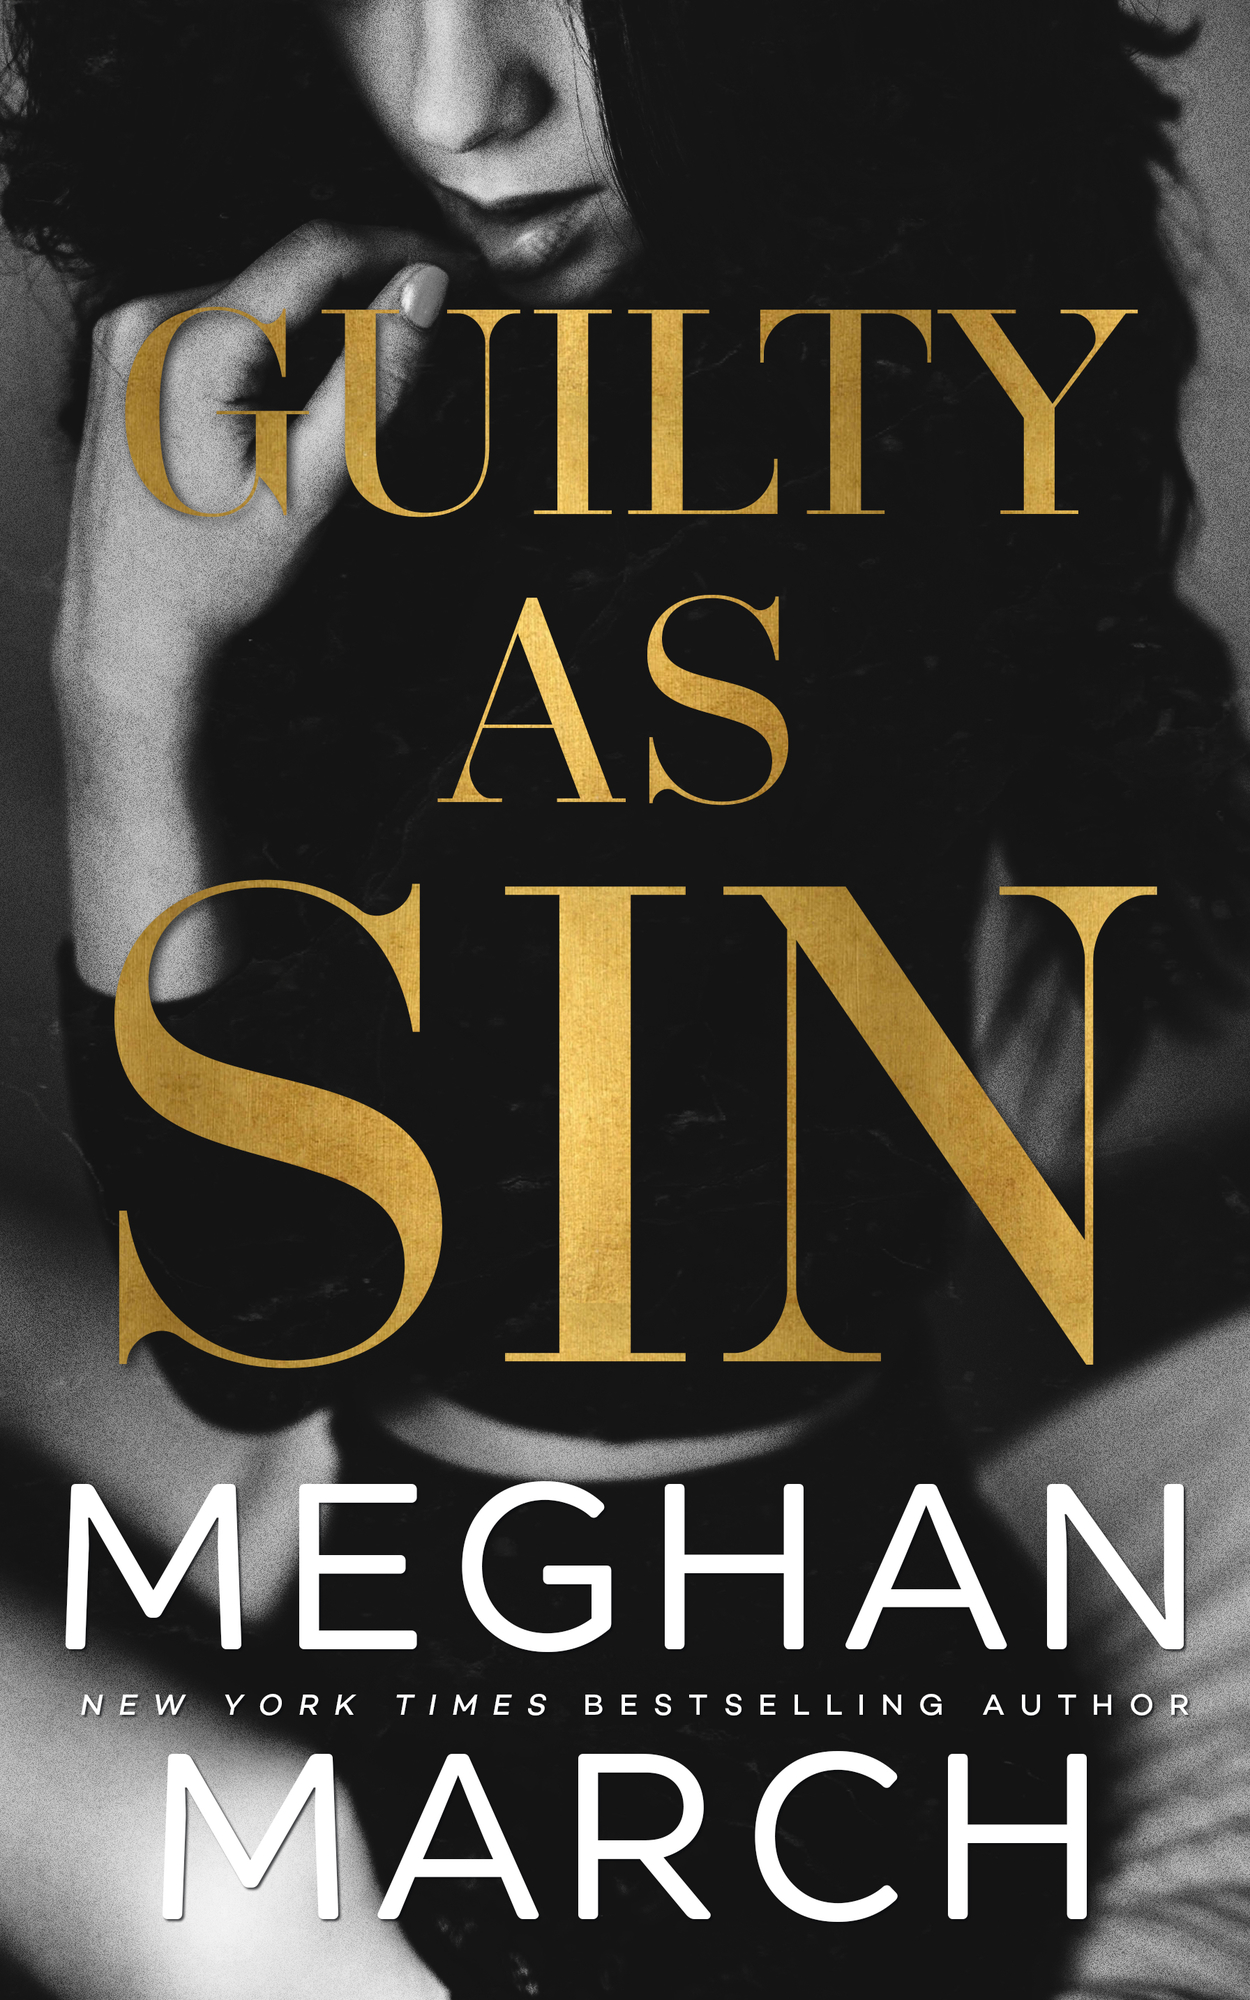 Guilty as Sin by Meghan March [Review]